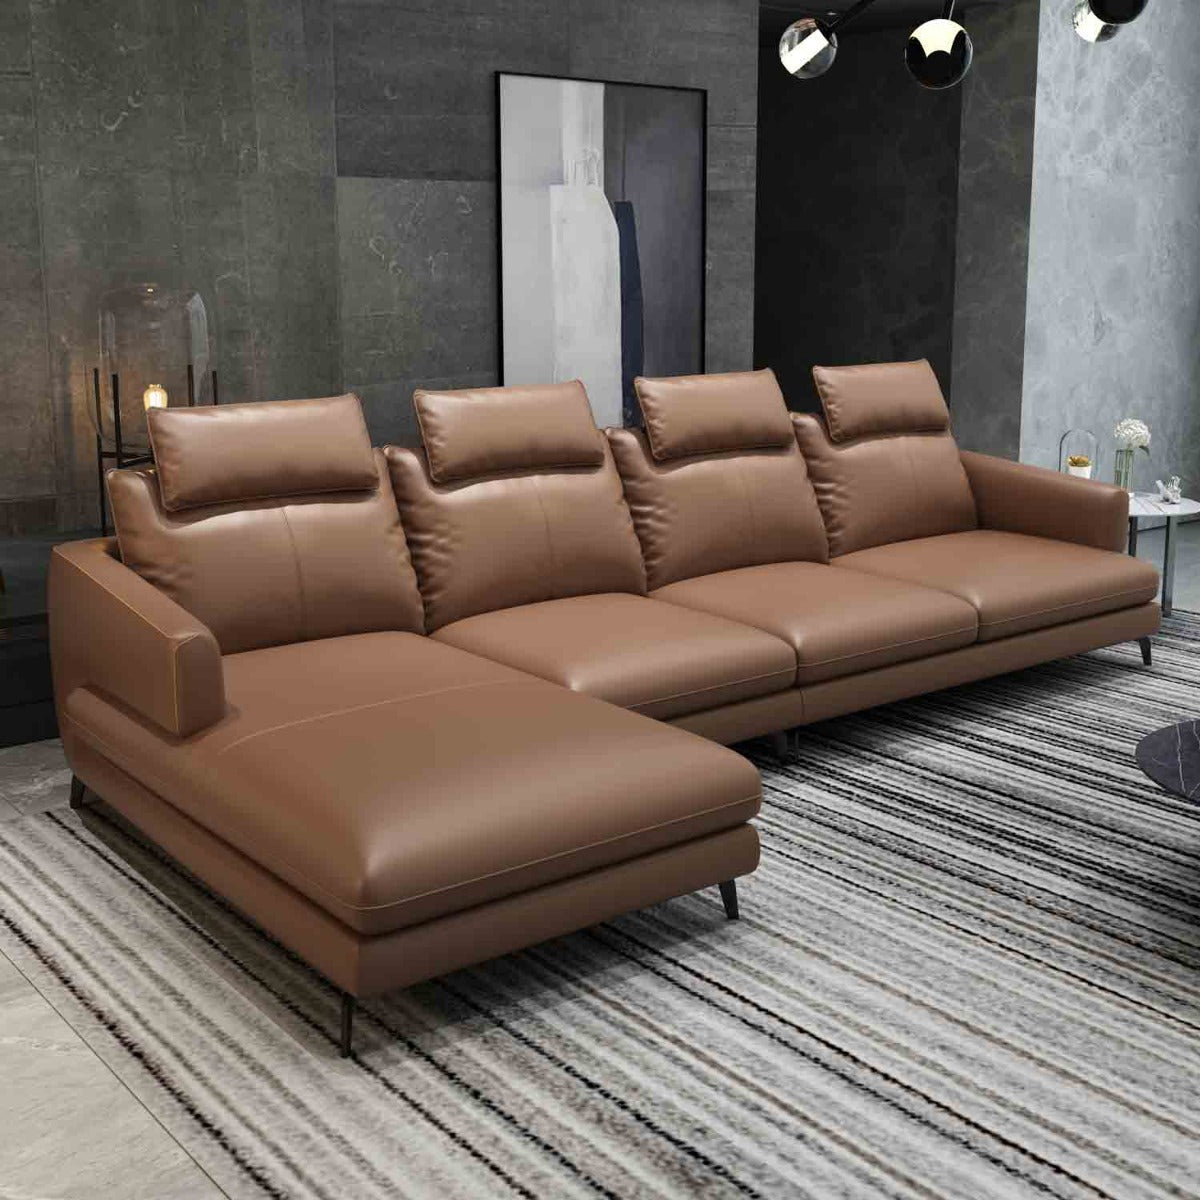 European Furniture - Marconi Left Hand Facing Sectional in Russet Brown - 74533L-3LHF - New Star Living